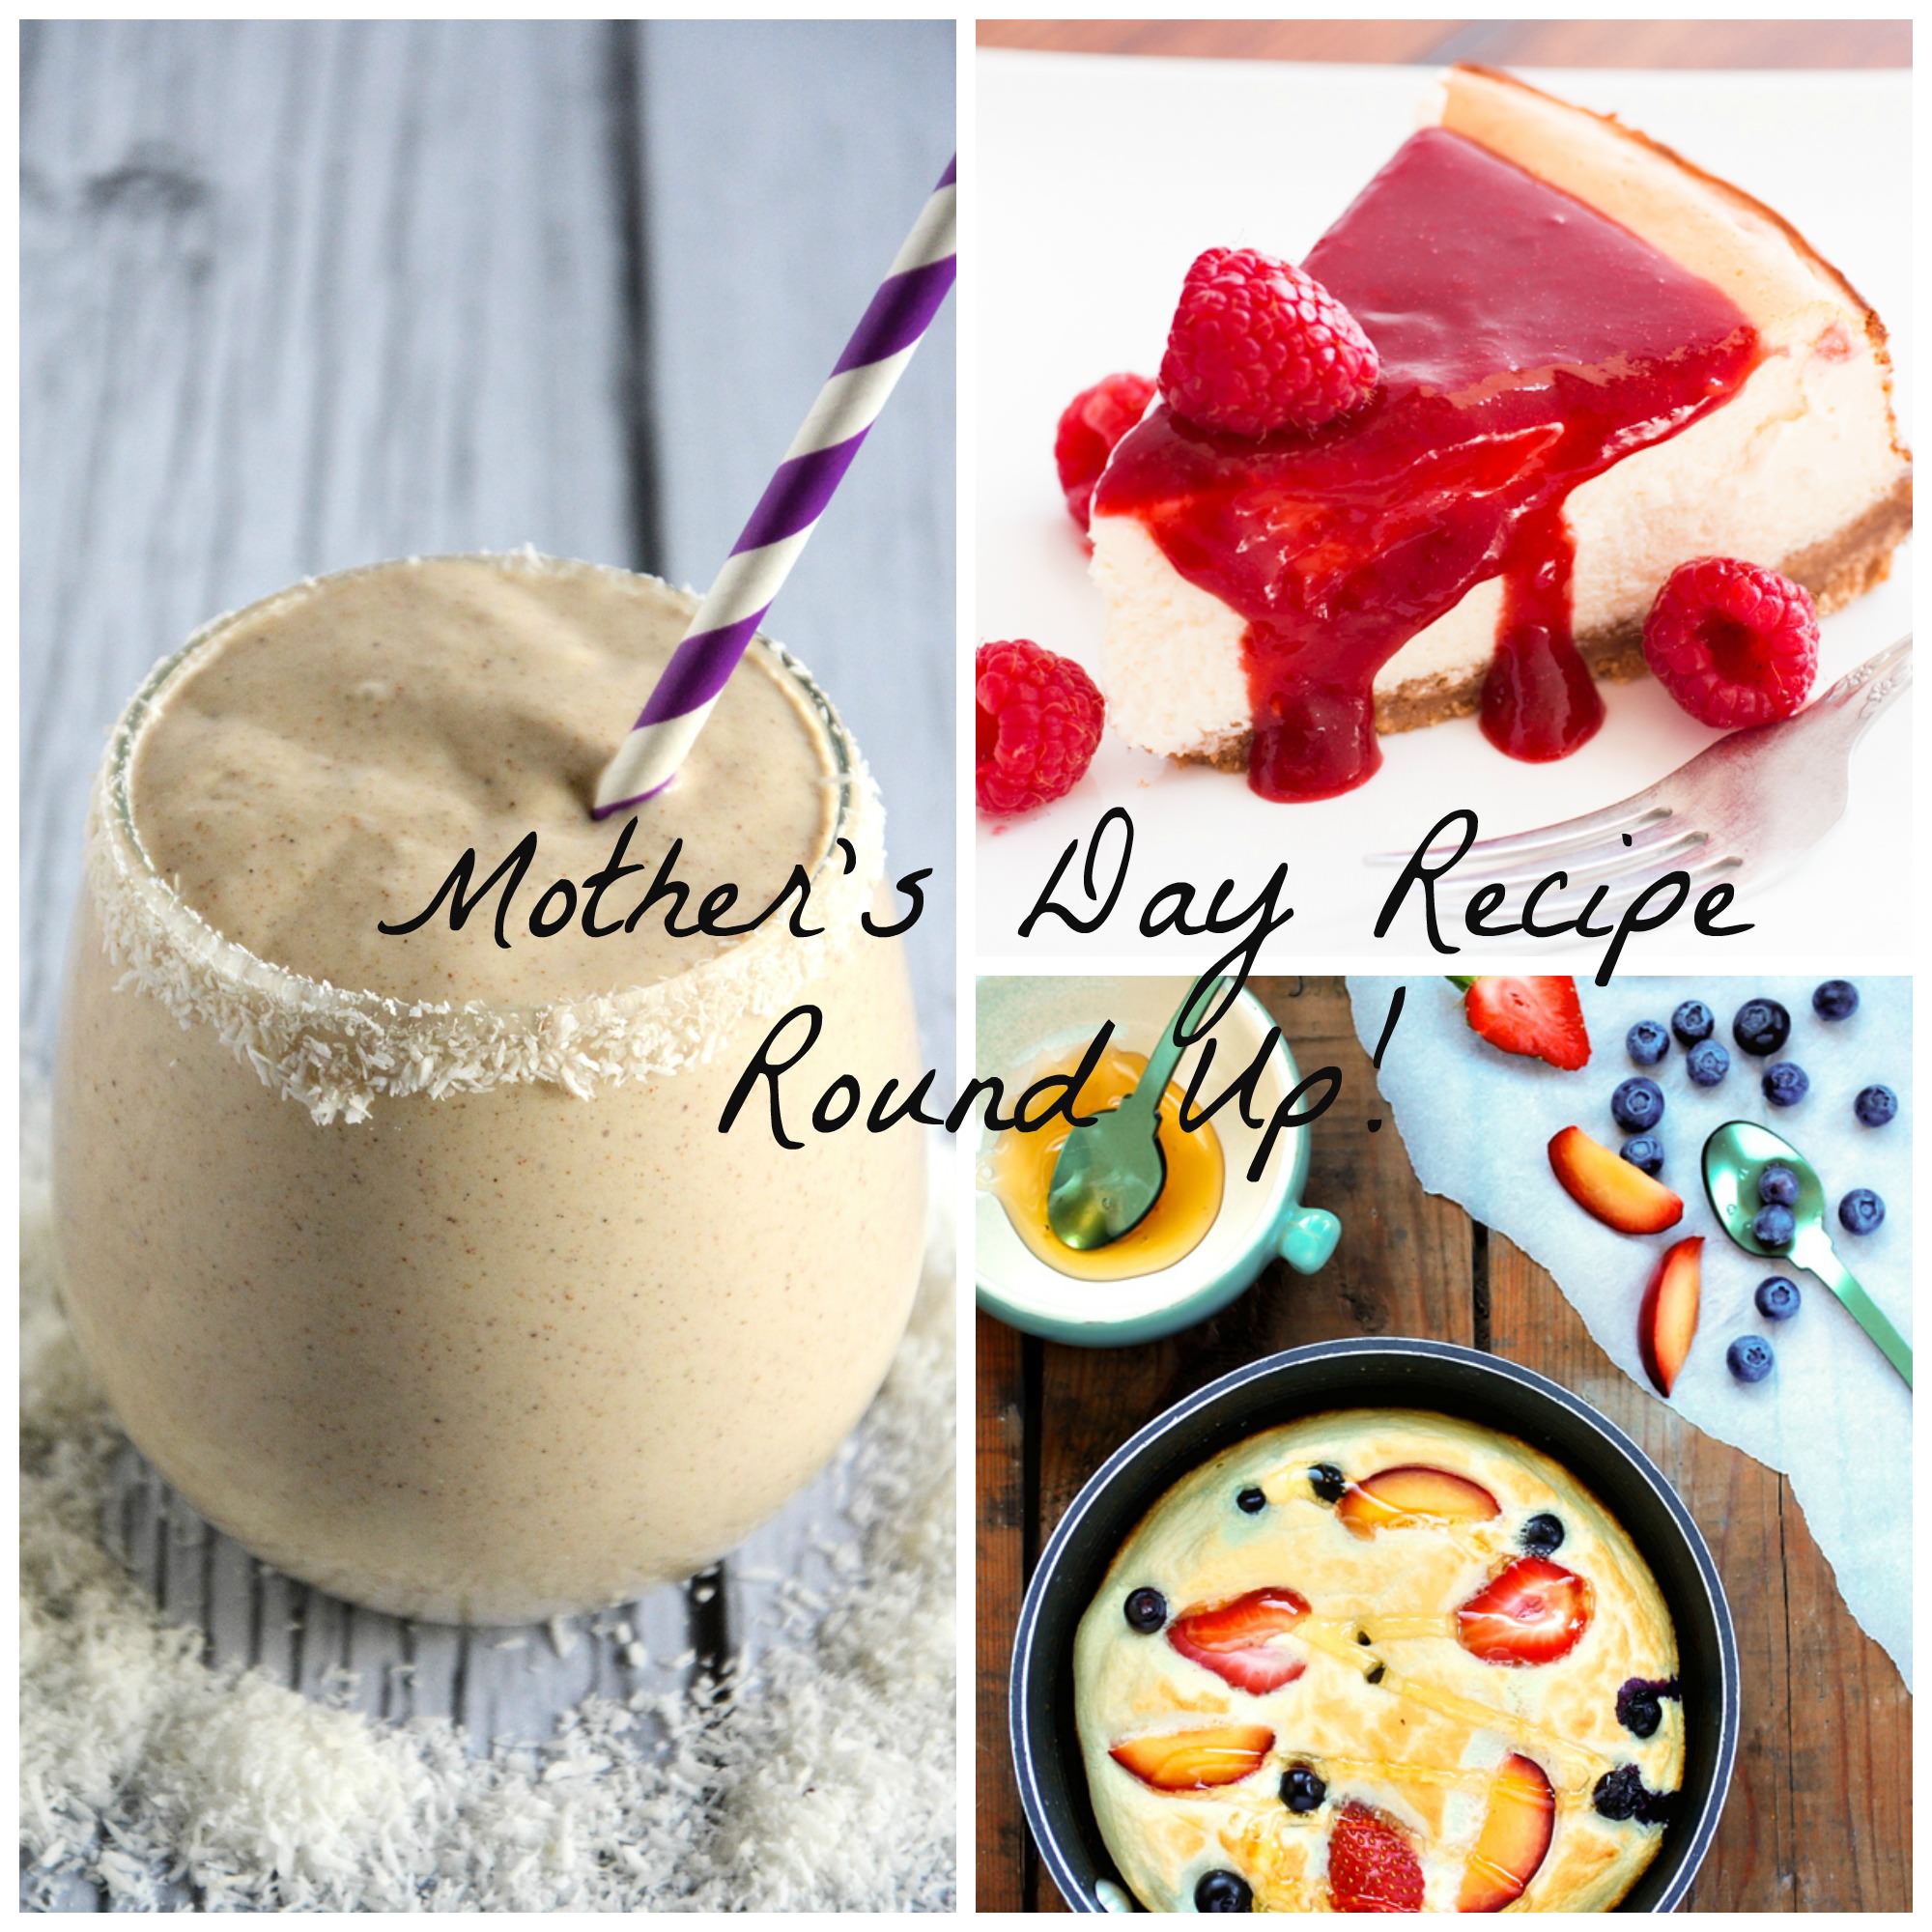 Mother's Day Recipe Round Up | The Housewife in Training Files